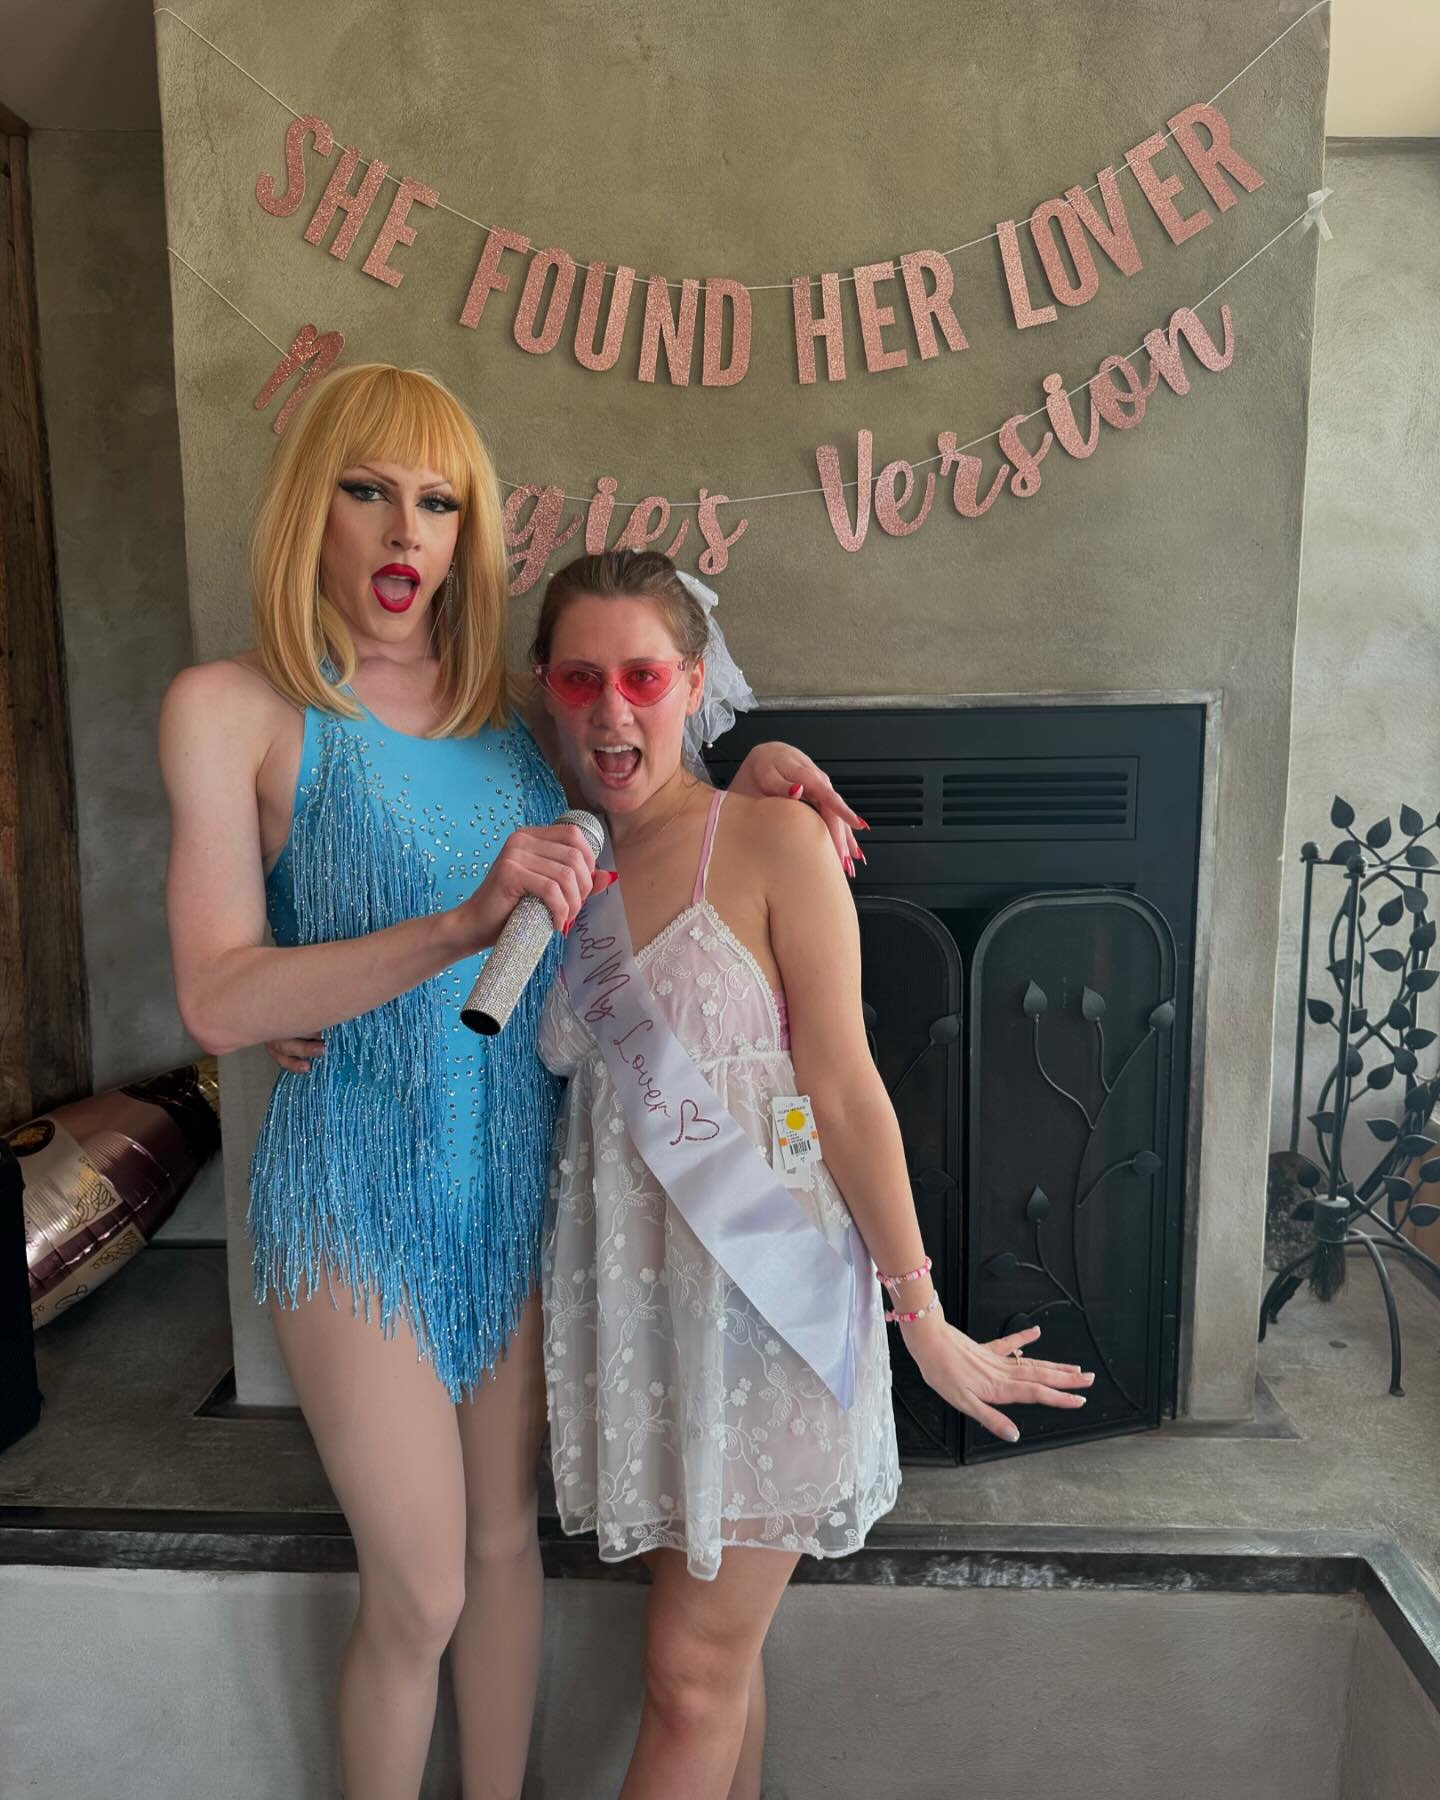 When Taylor comes to visit #swifties 

Nothing better than hanging out with your bachelorette party at the Airbnb and then ✊ KNOCK ✊ KNOCK ✊ a drag queen serving Taylor Swift comes to surprise y&rsquo;all with a performance, sing a long 🎤 and games 